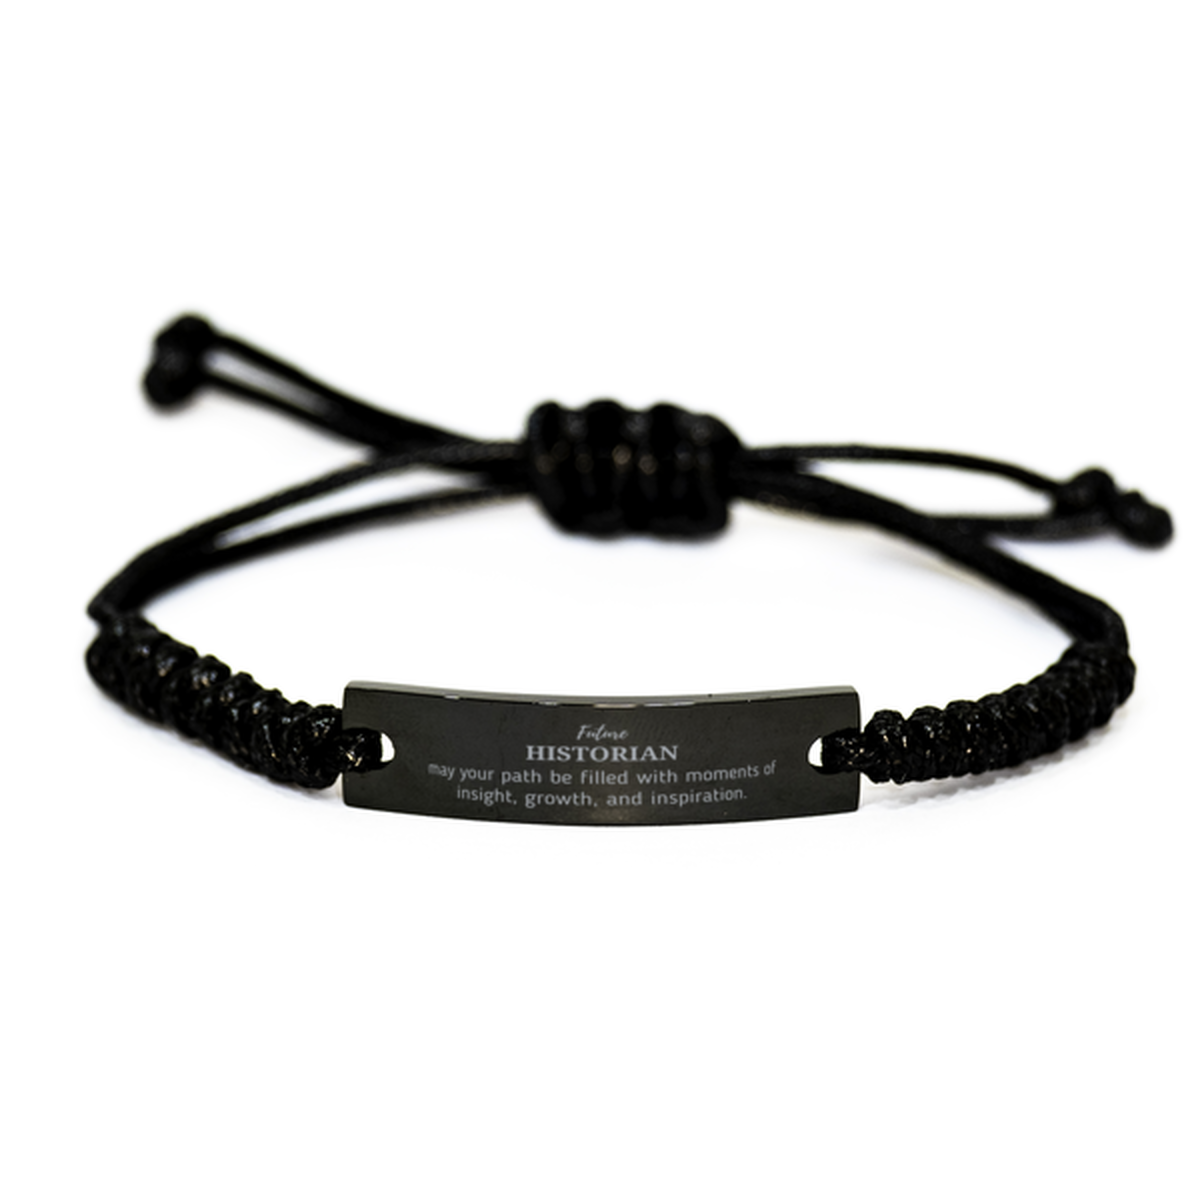 Future Historian Gifts, May your path be filled with moments of insight, Graduation Gifts for New Historian, Christmas Unique Black Rope Bracelet For Men, Women, Friends